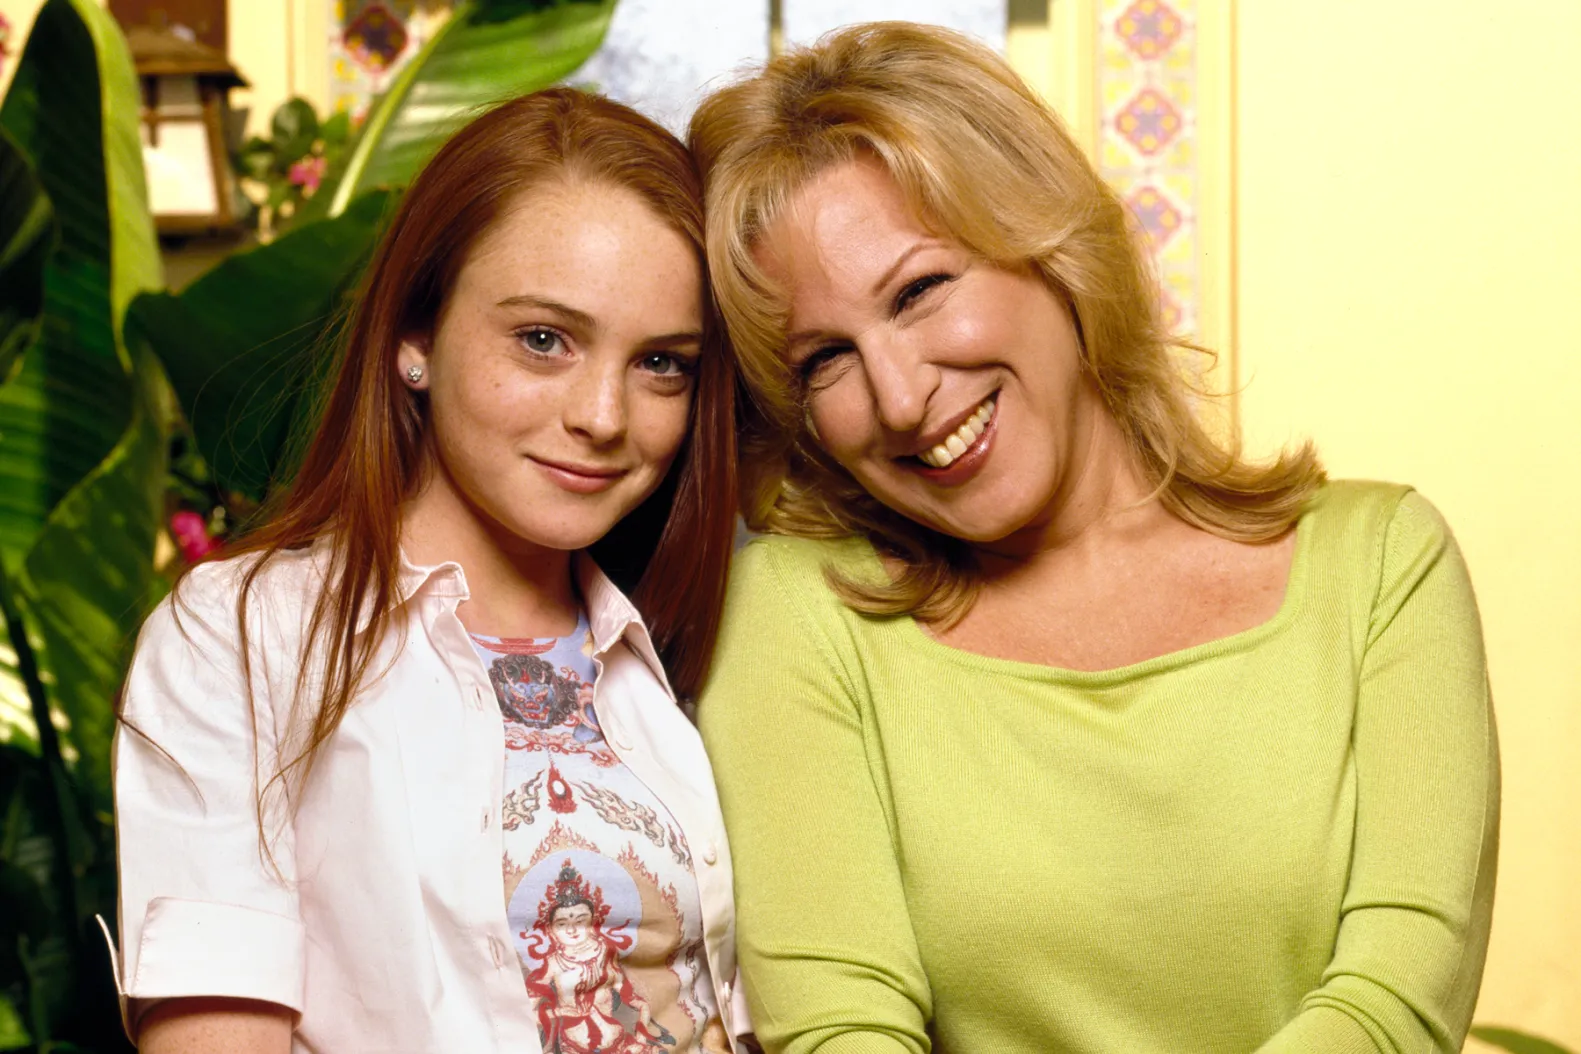 ‘Bette’ Sitcom Was a Mistake, So Was Not Suing Lindsay Lohan, Says Bette Midler